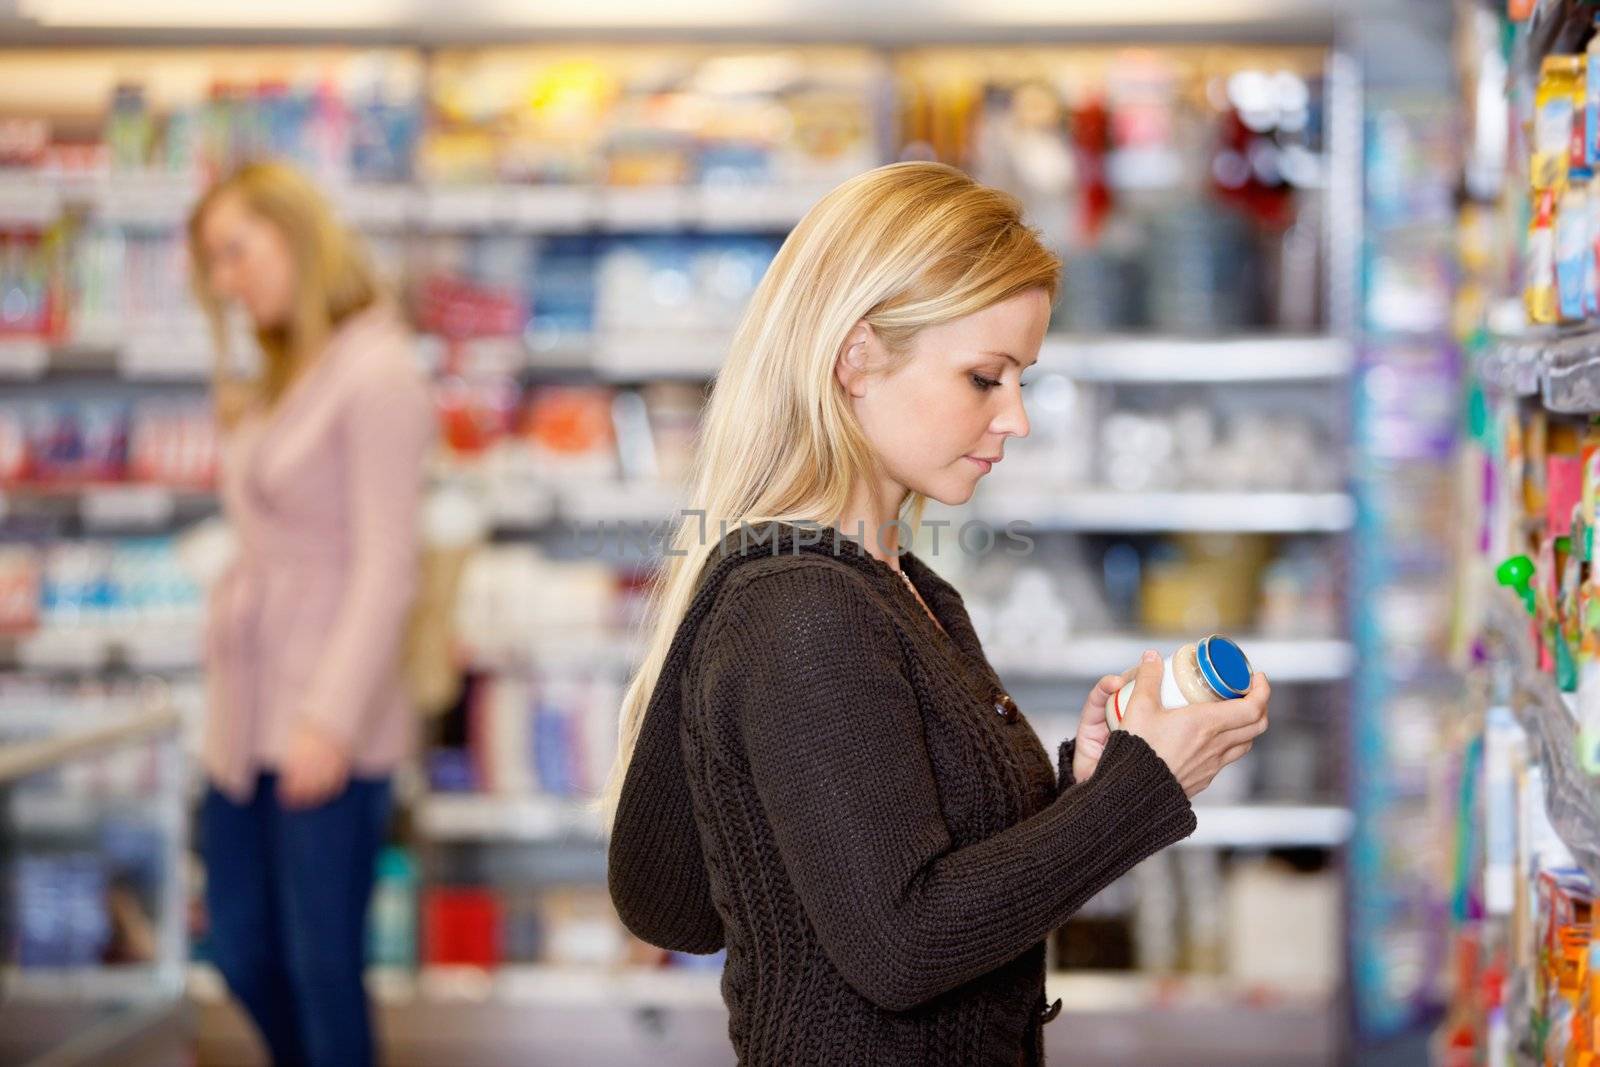 Young woman comparing products in the supermarket with people in the background